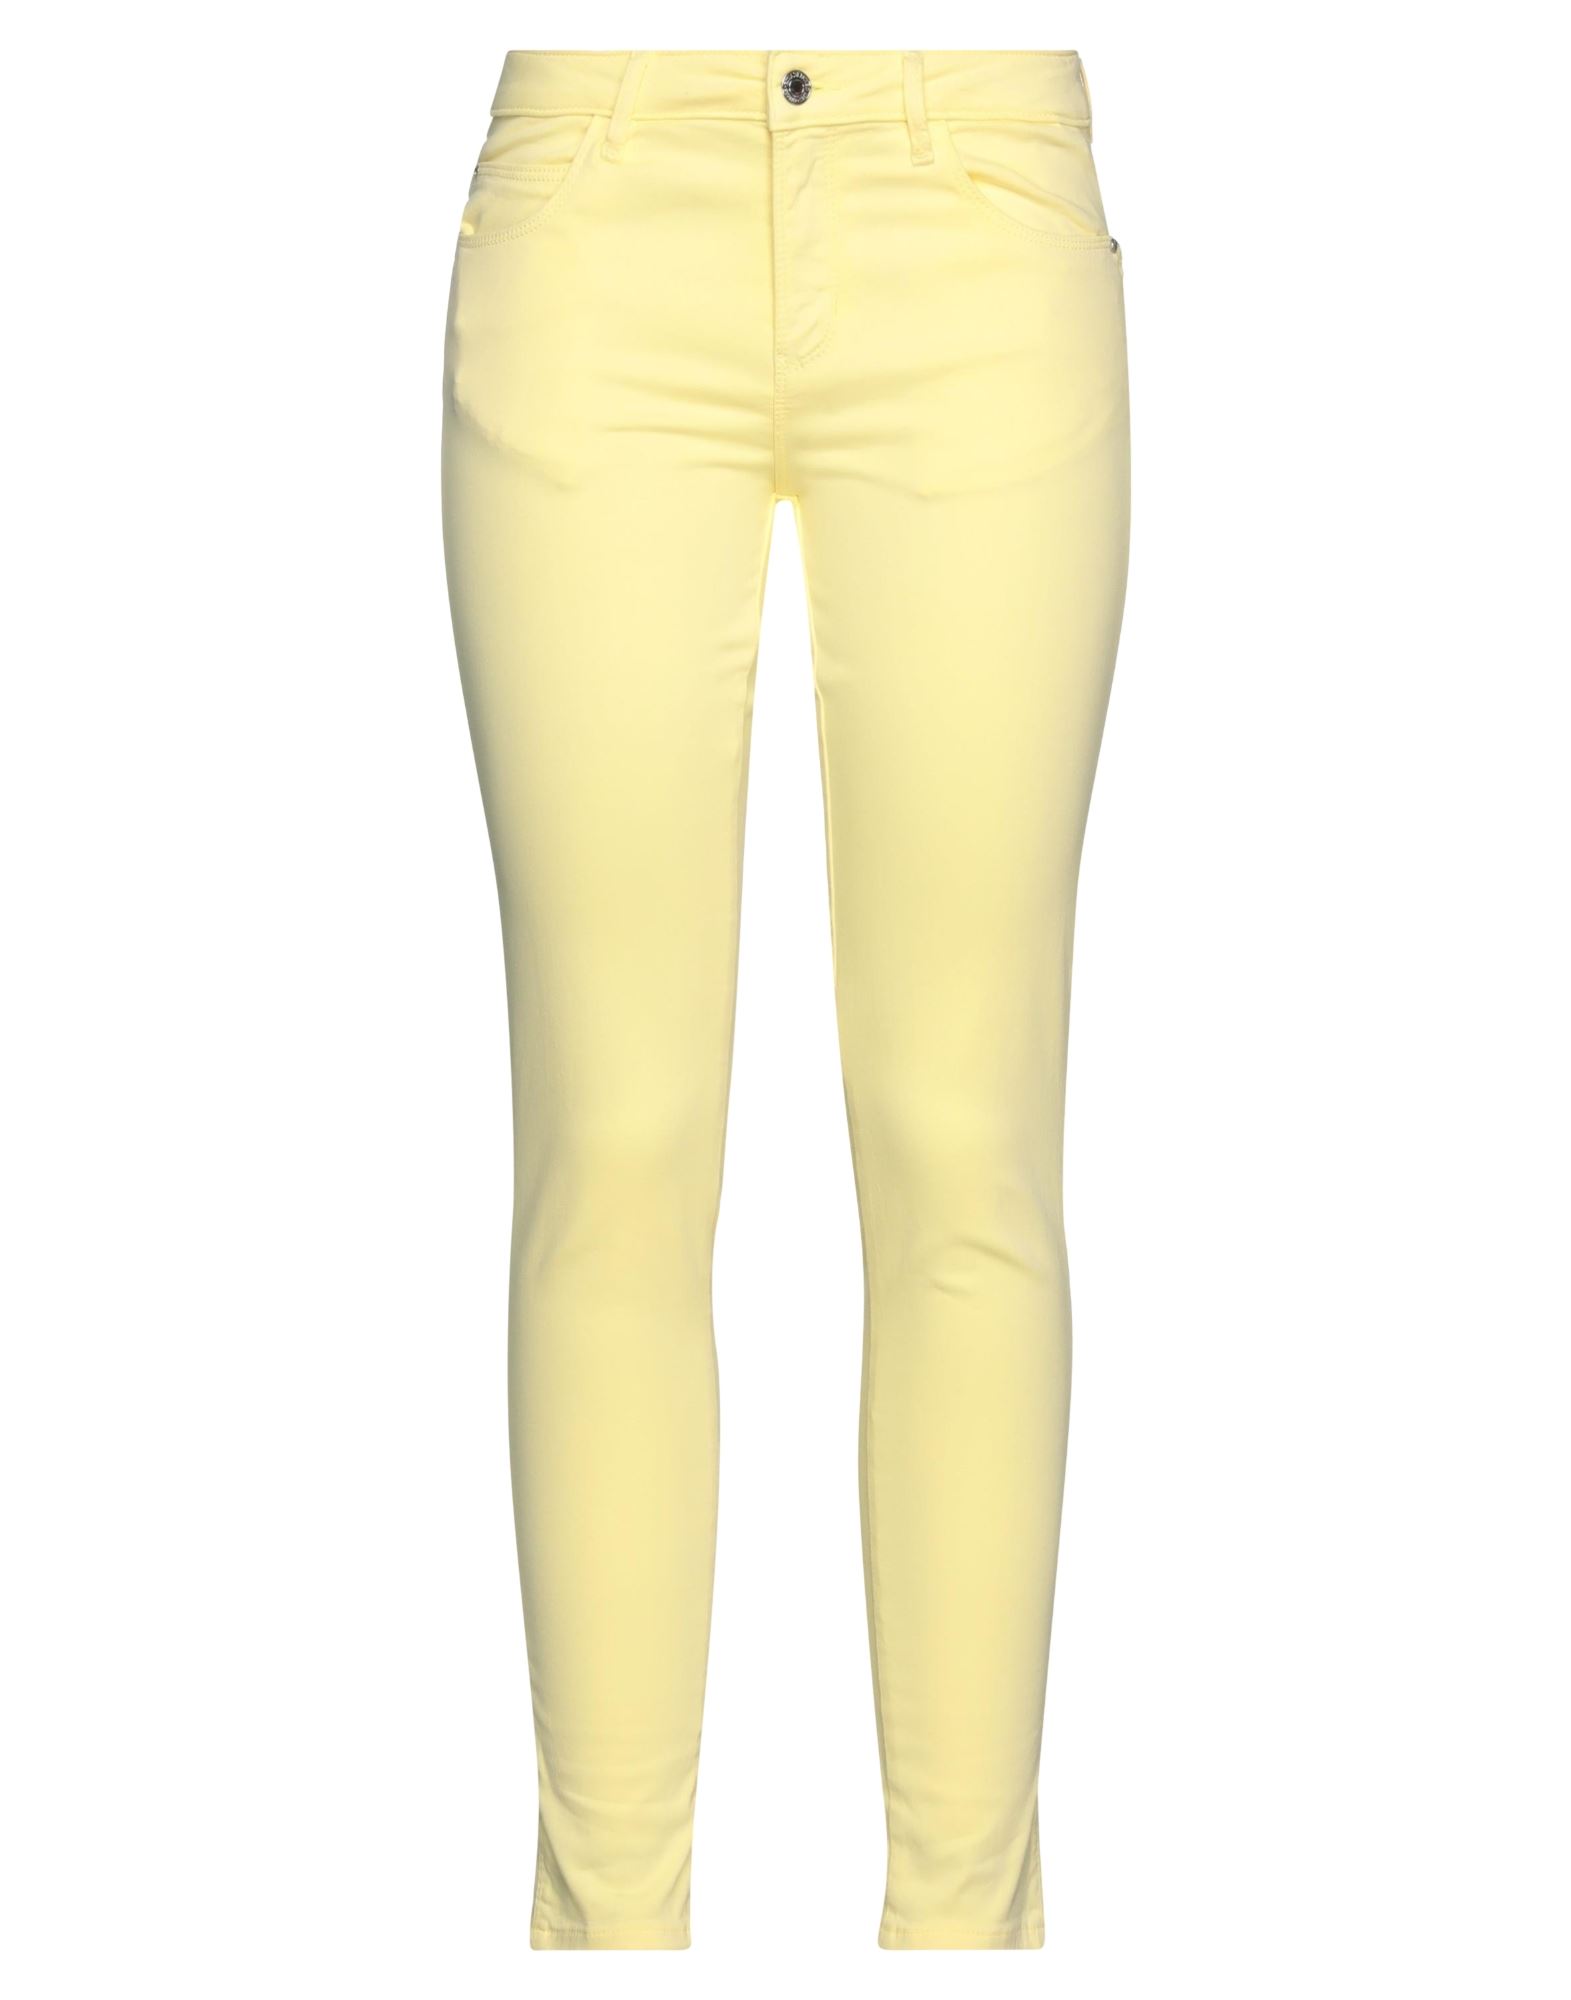 GUESS GUESS WOMAN PANTS YELLOW SIZE 30W-30L COTTON, ELASTOMULTIESTER, ELASTANE